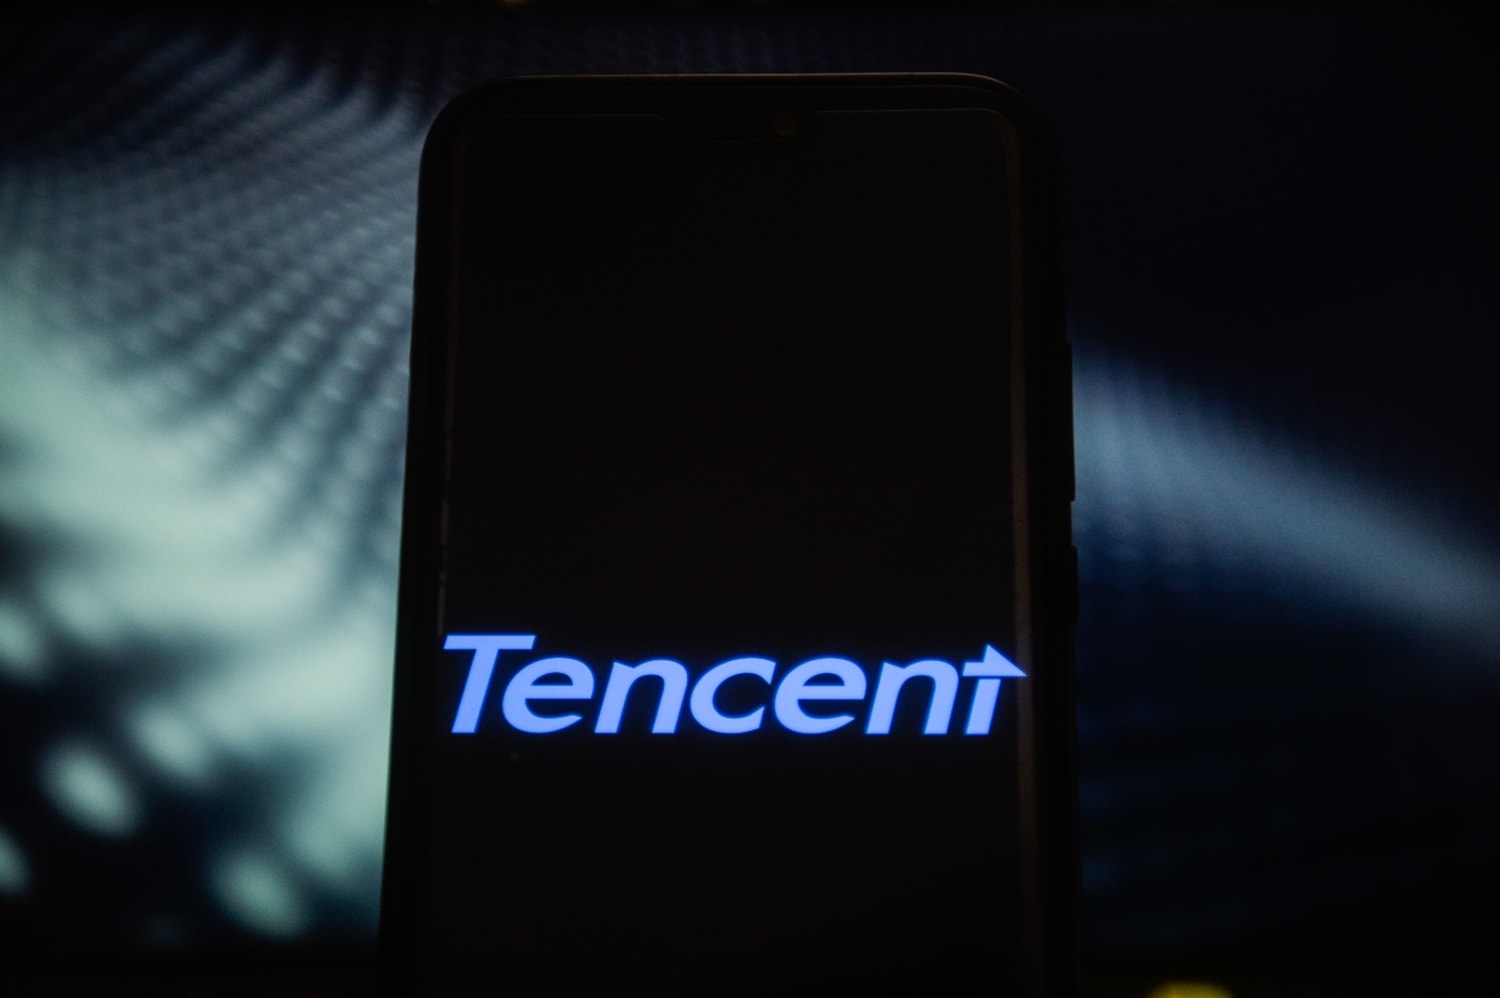 Tencent pledges $70 billion investment in high-tech areas as Beijing pushes digital infrastructure